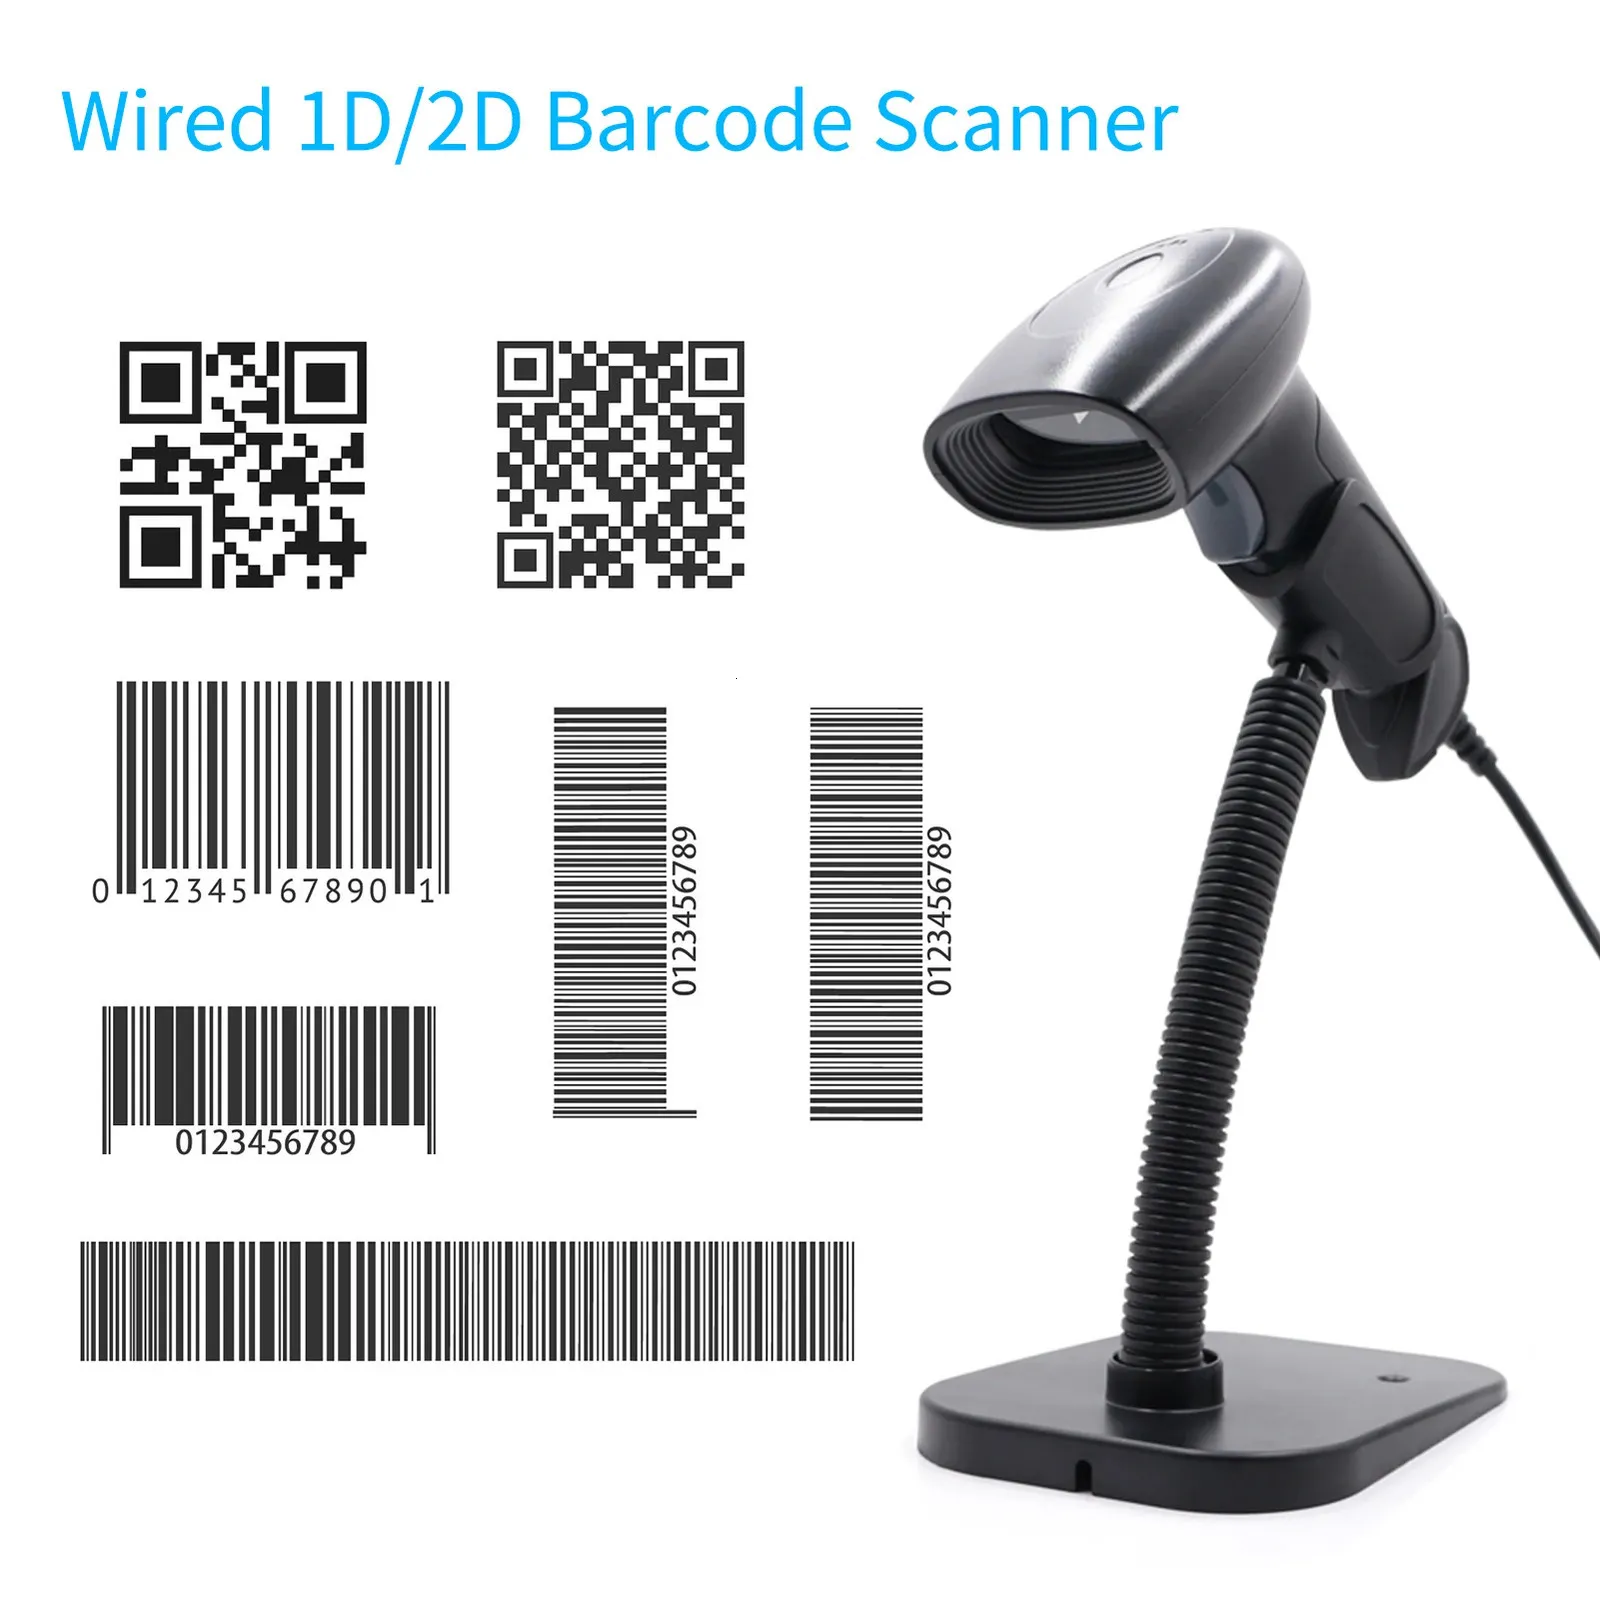 USB Barcode Scanner 1D 2D QR Handheld Wired Bar Code Reader with Stand Compatible Windows XP7810 Android Linux System 240229